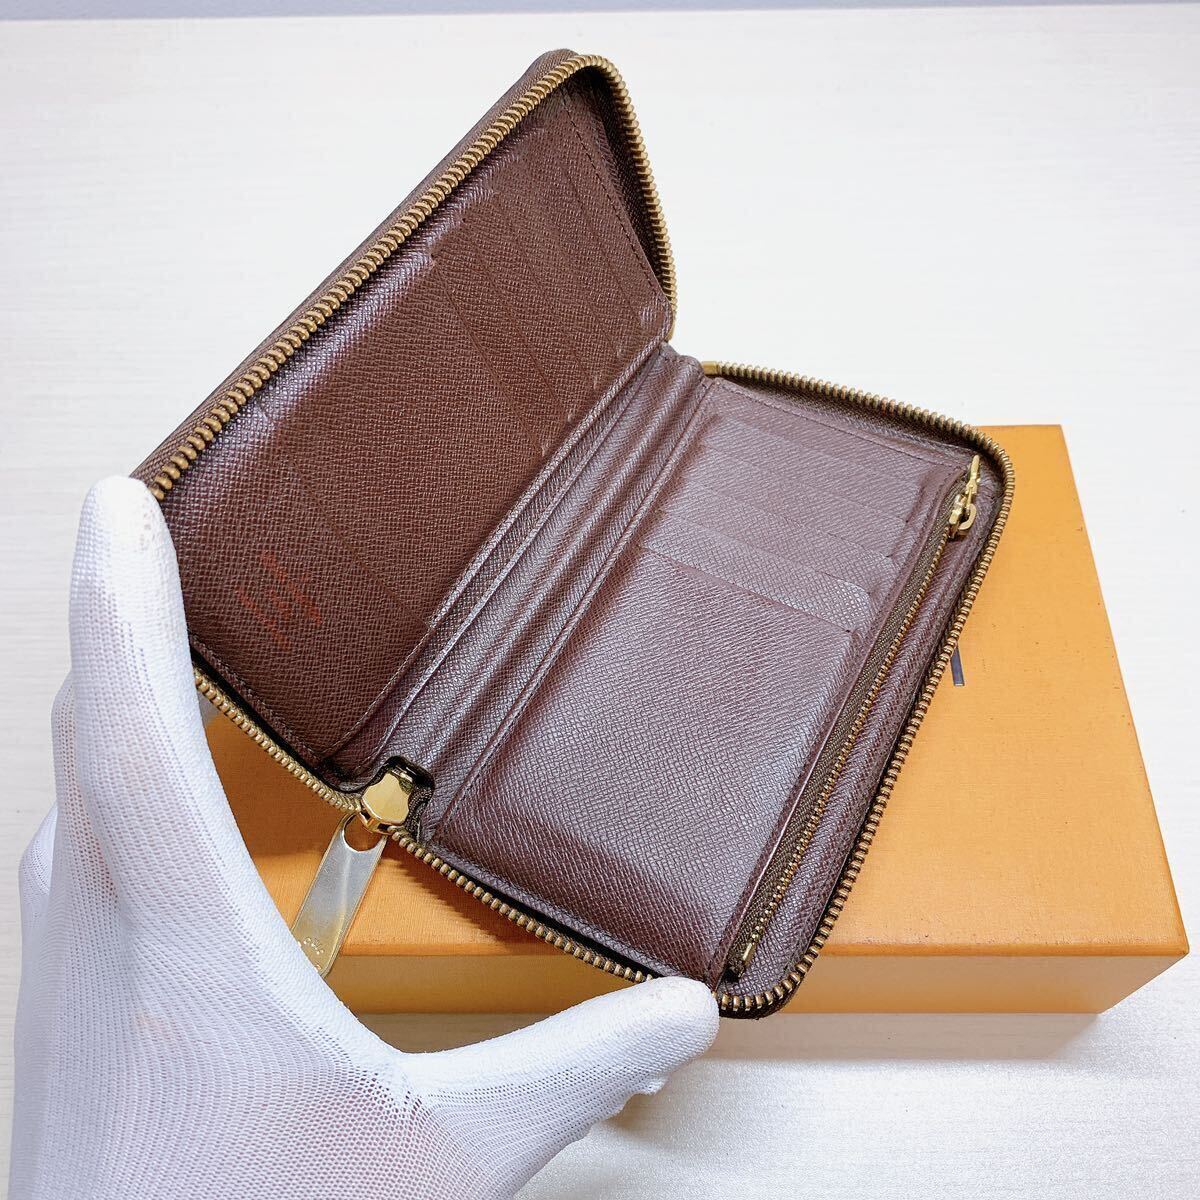 A040【美品】LOUIS VUITTON ルイヴィトン ダミエ 長財布 ジッピー・コンパクトウォレットN60028/MI0133_画像5